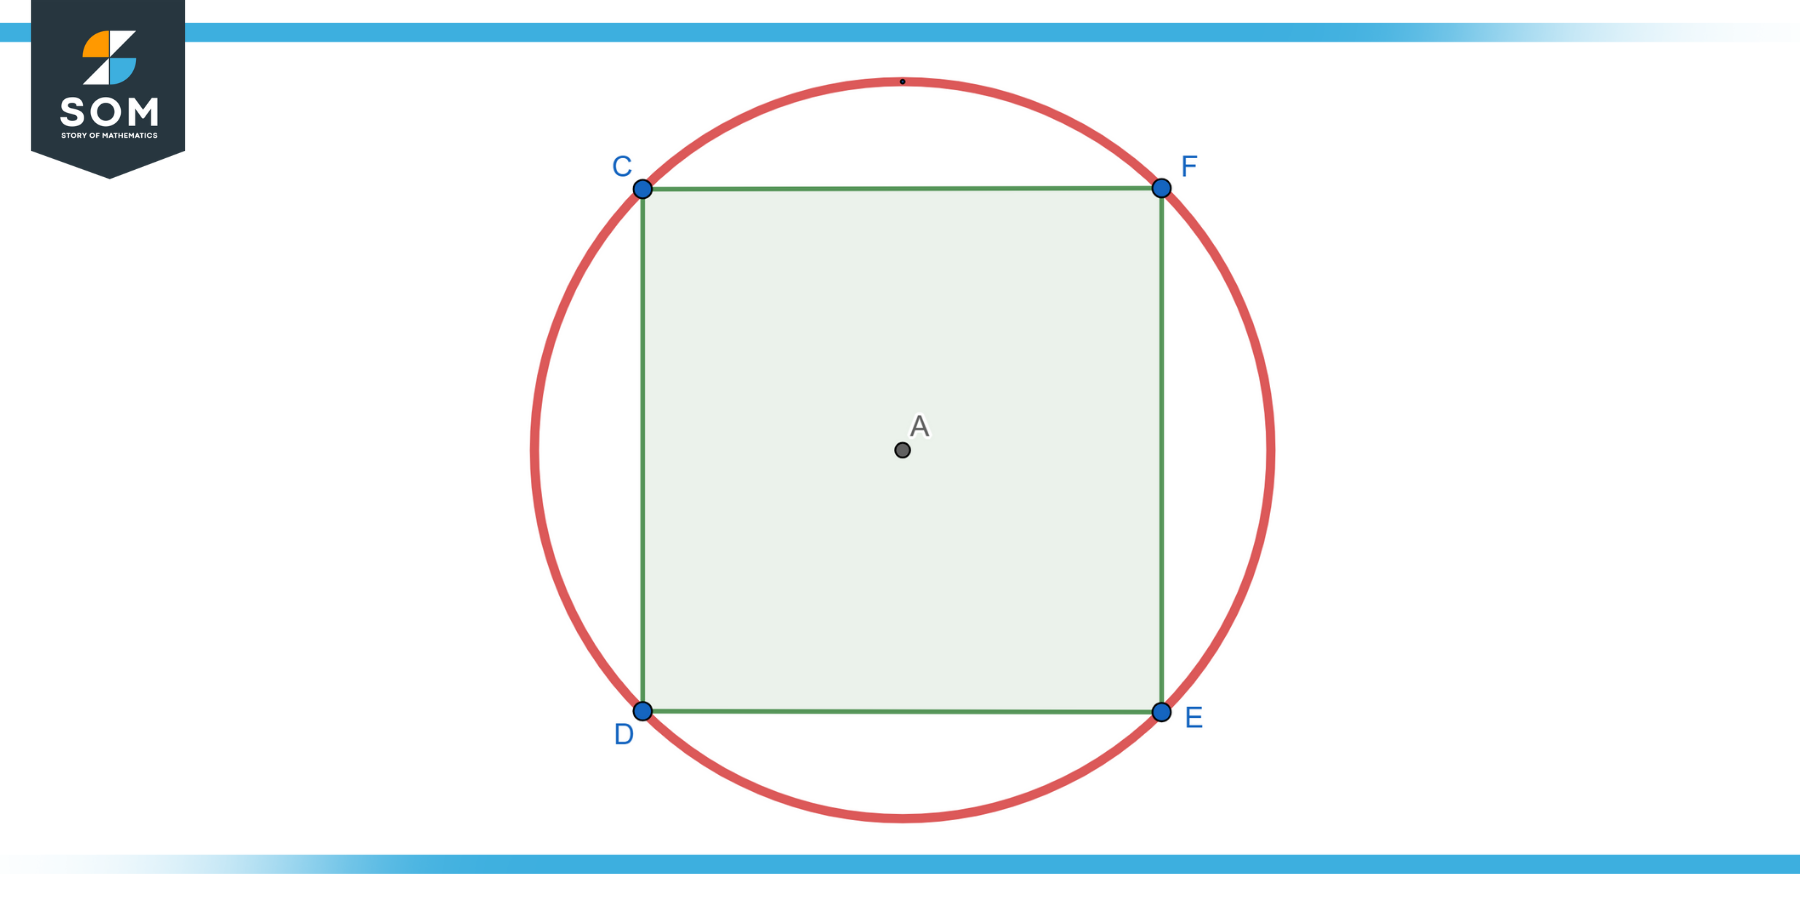 Graphical representation of a circle with square inscribed